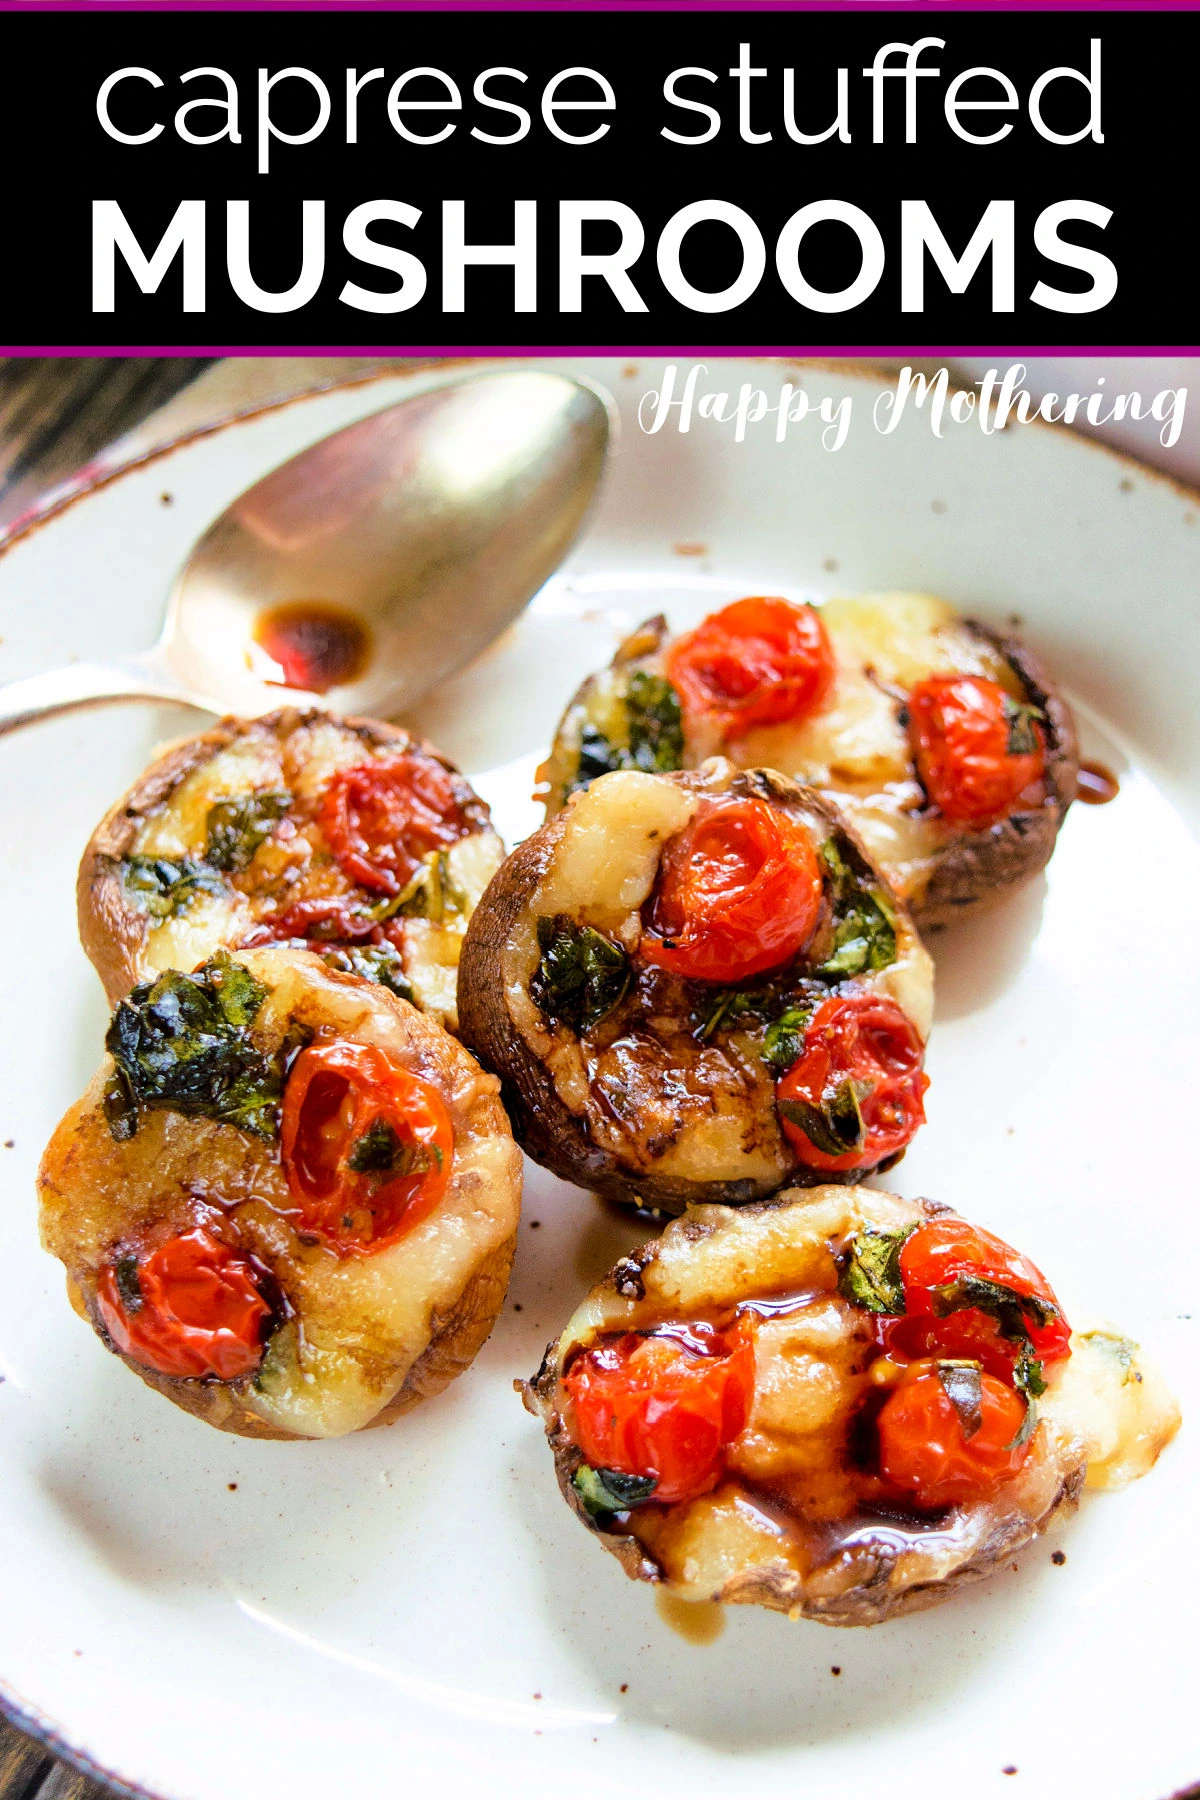 Five caprese stuffed mushrooms on a white plate with brown edge.